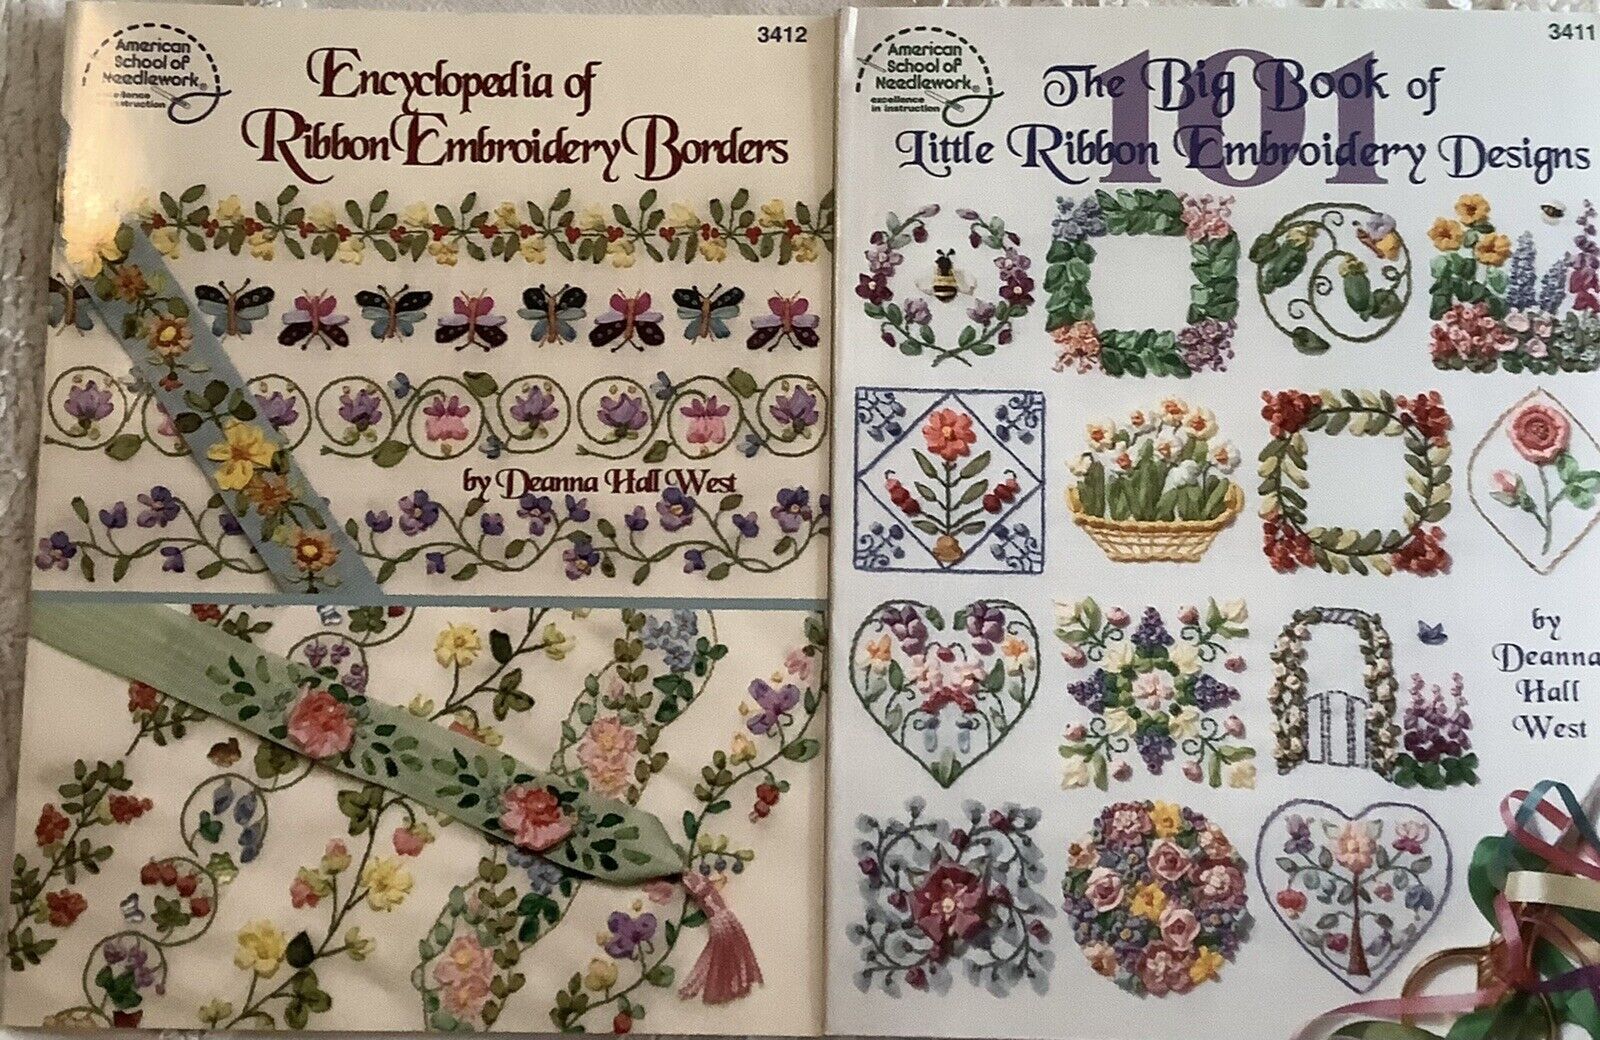 Ribbon Embroidery Designs Borders By Deanna Hall West Books 3411 3412